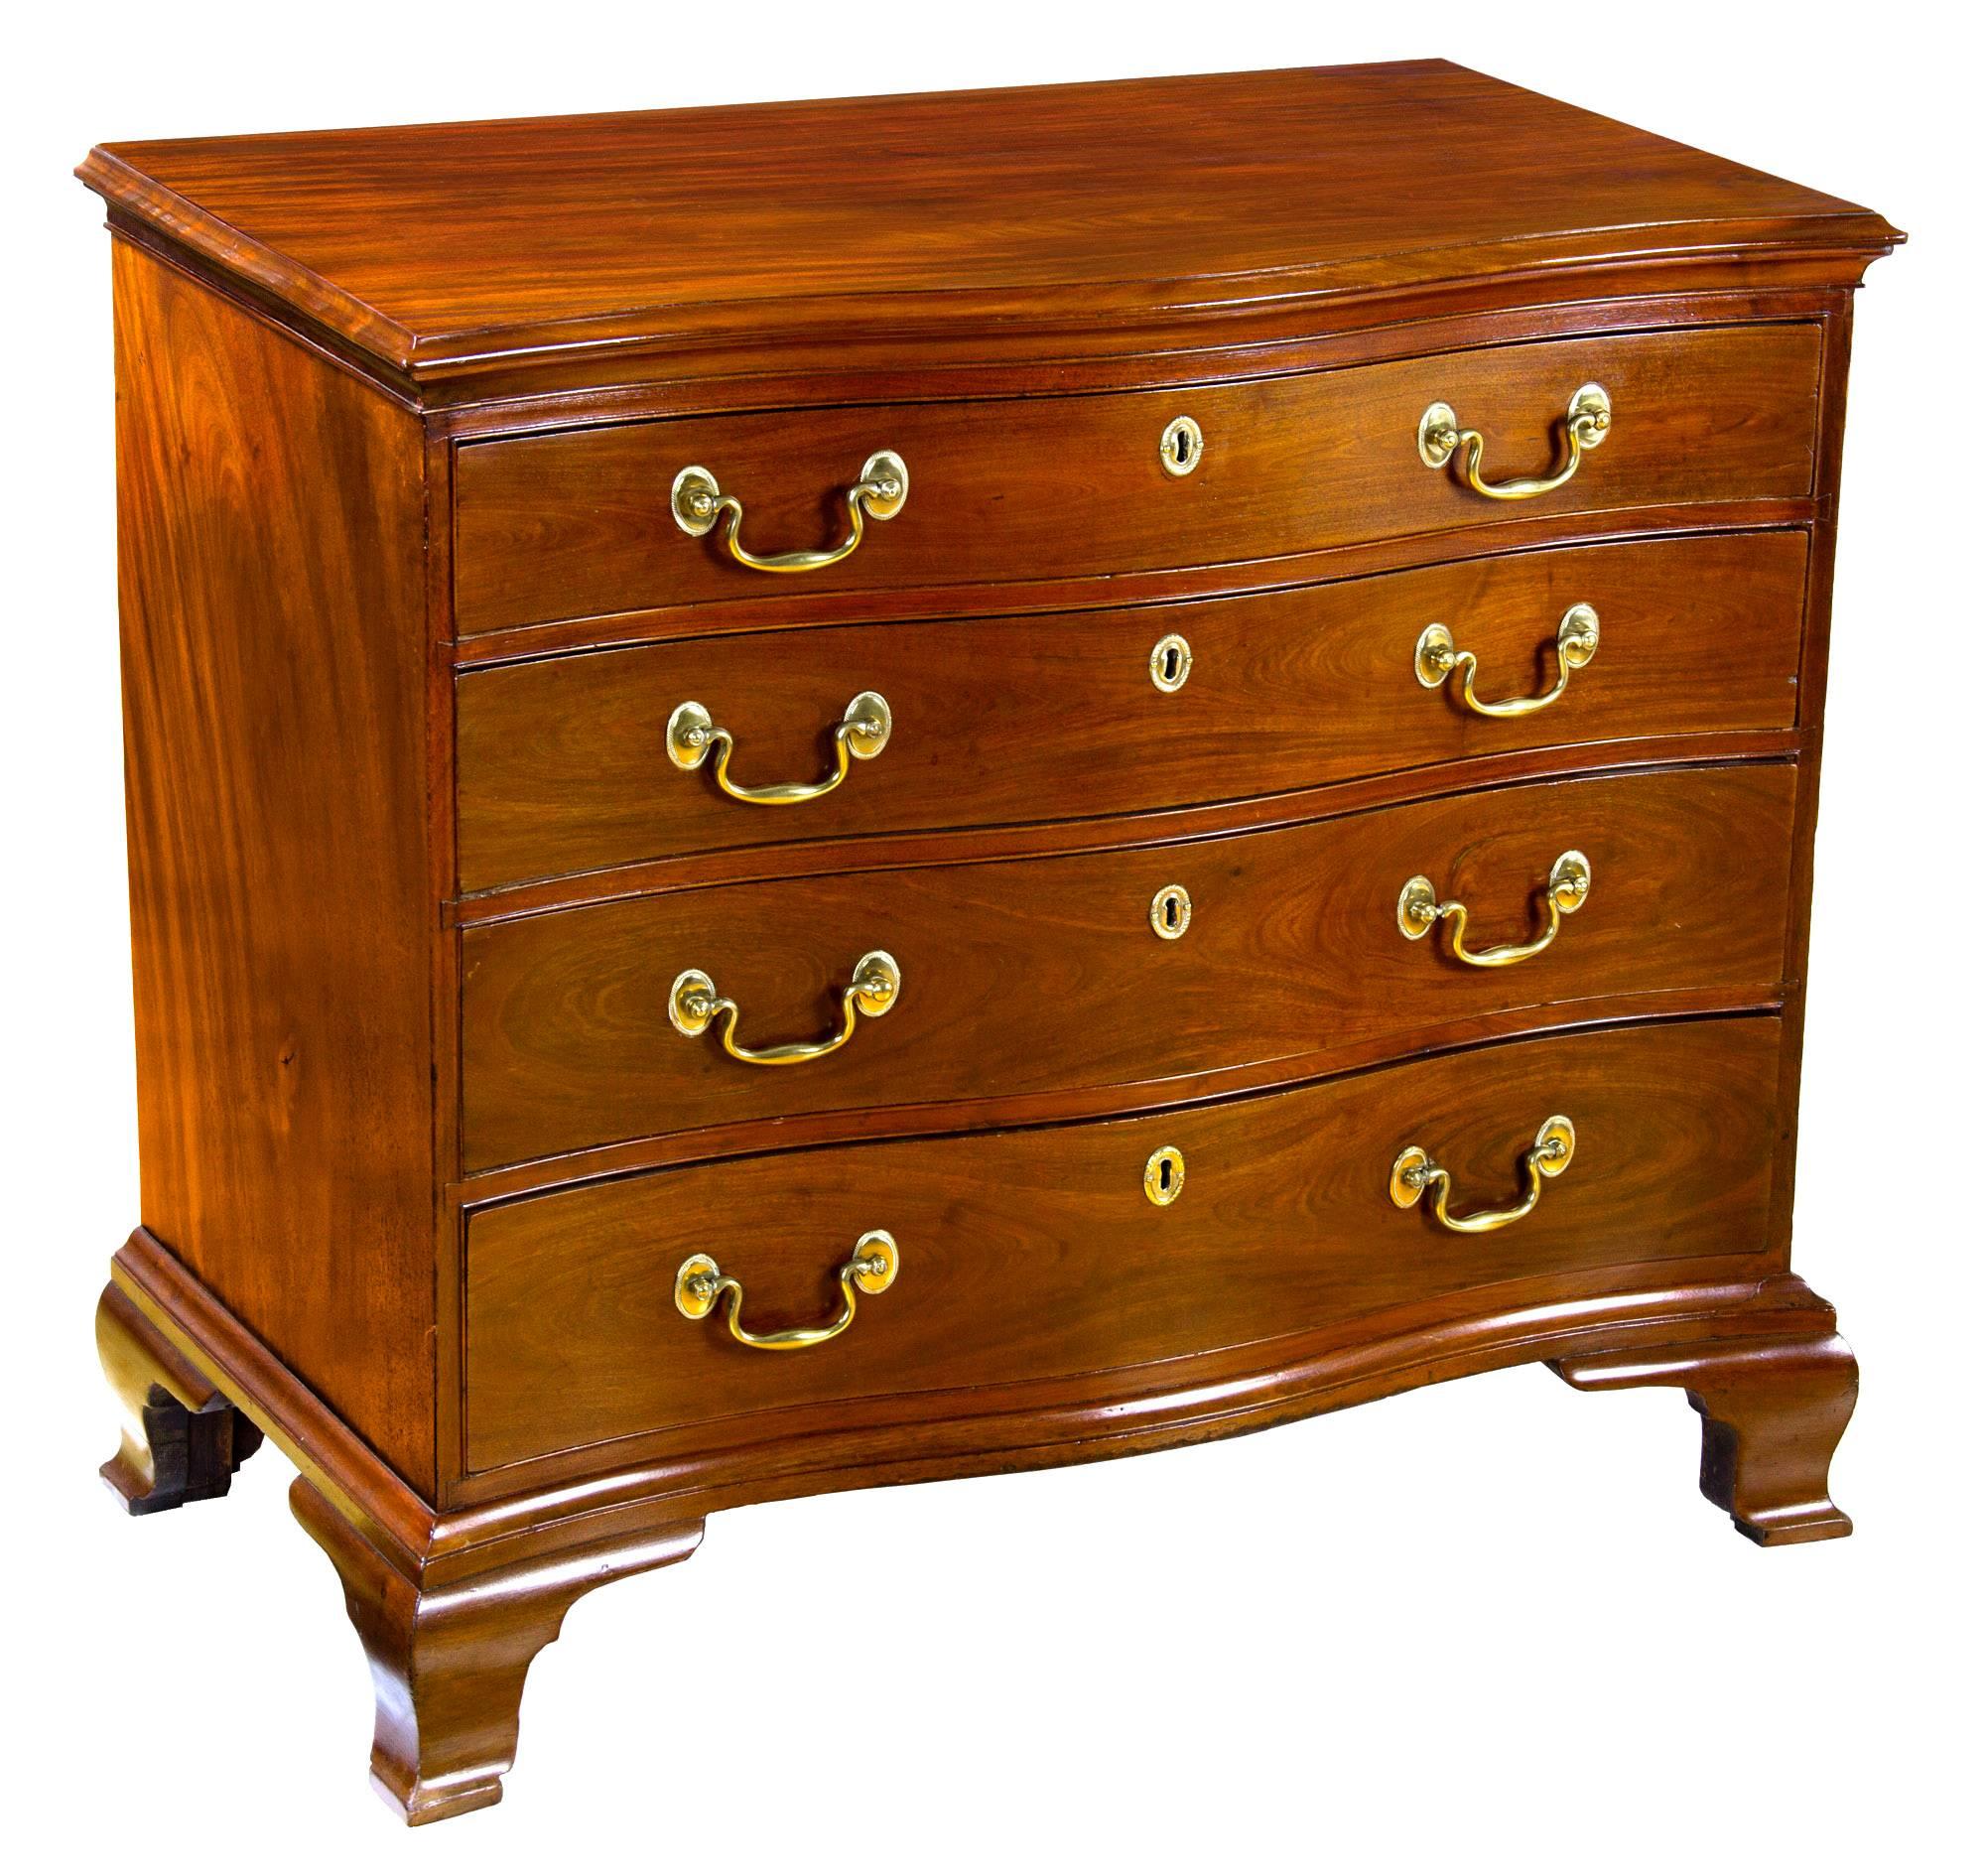 This serpentine bureau is composed of strongly figured dense Cuban mahogany. The drawer fronts are carved out of solid logs and all surfaces, i.e. the top and sides, are strongly figured and vibrant. (See attached images of the top and sides.)